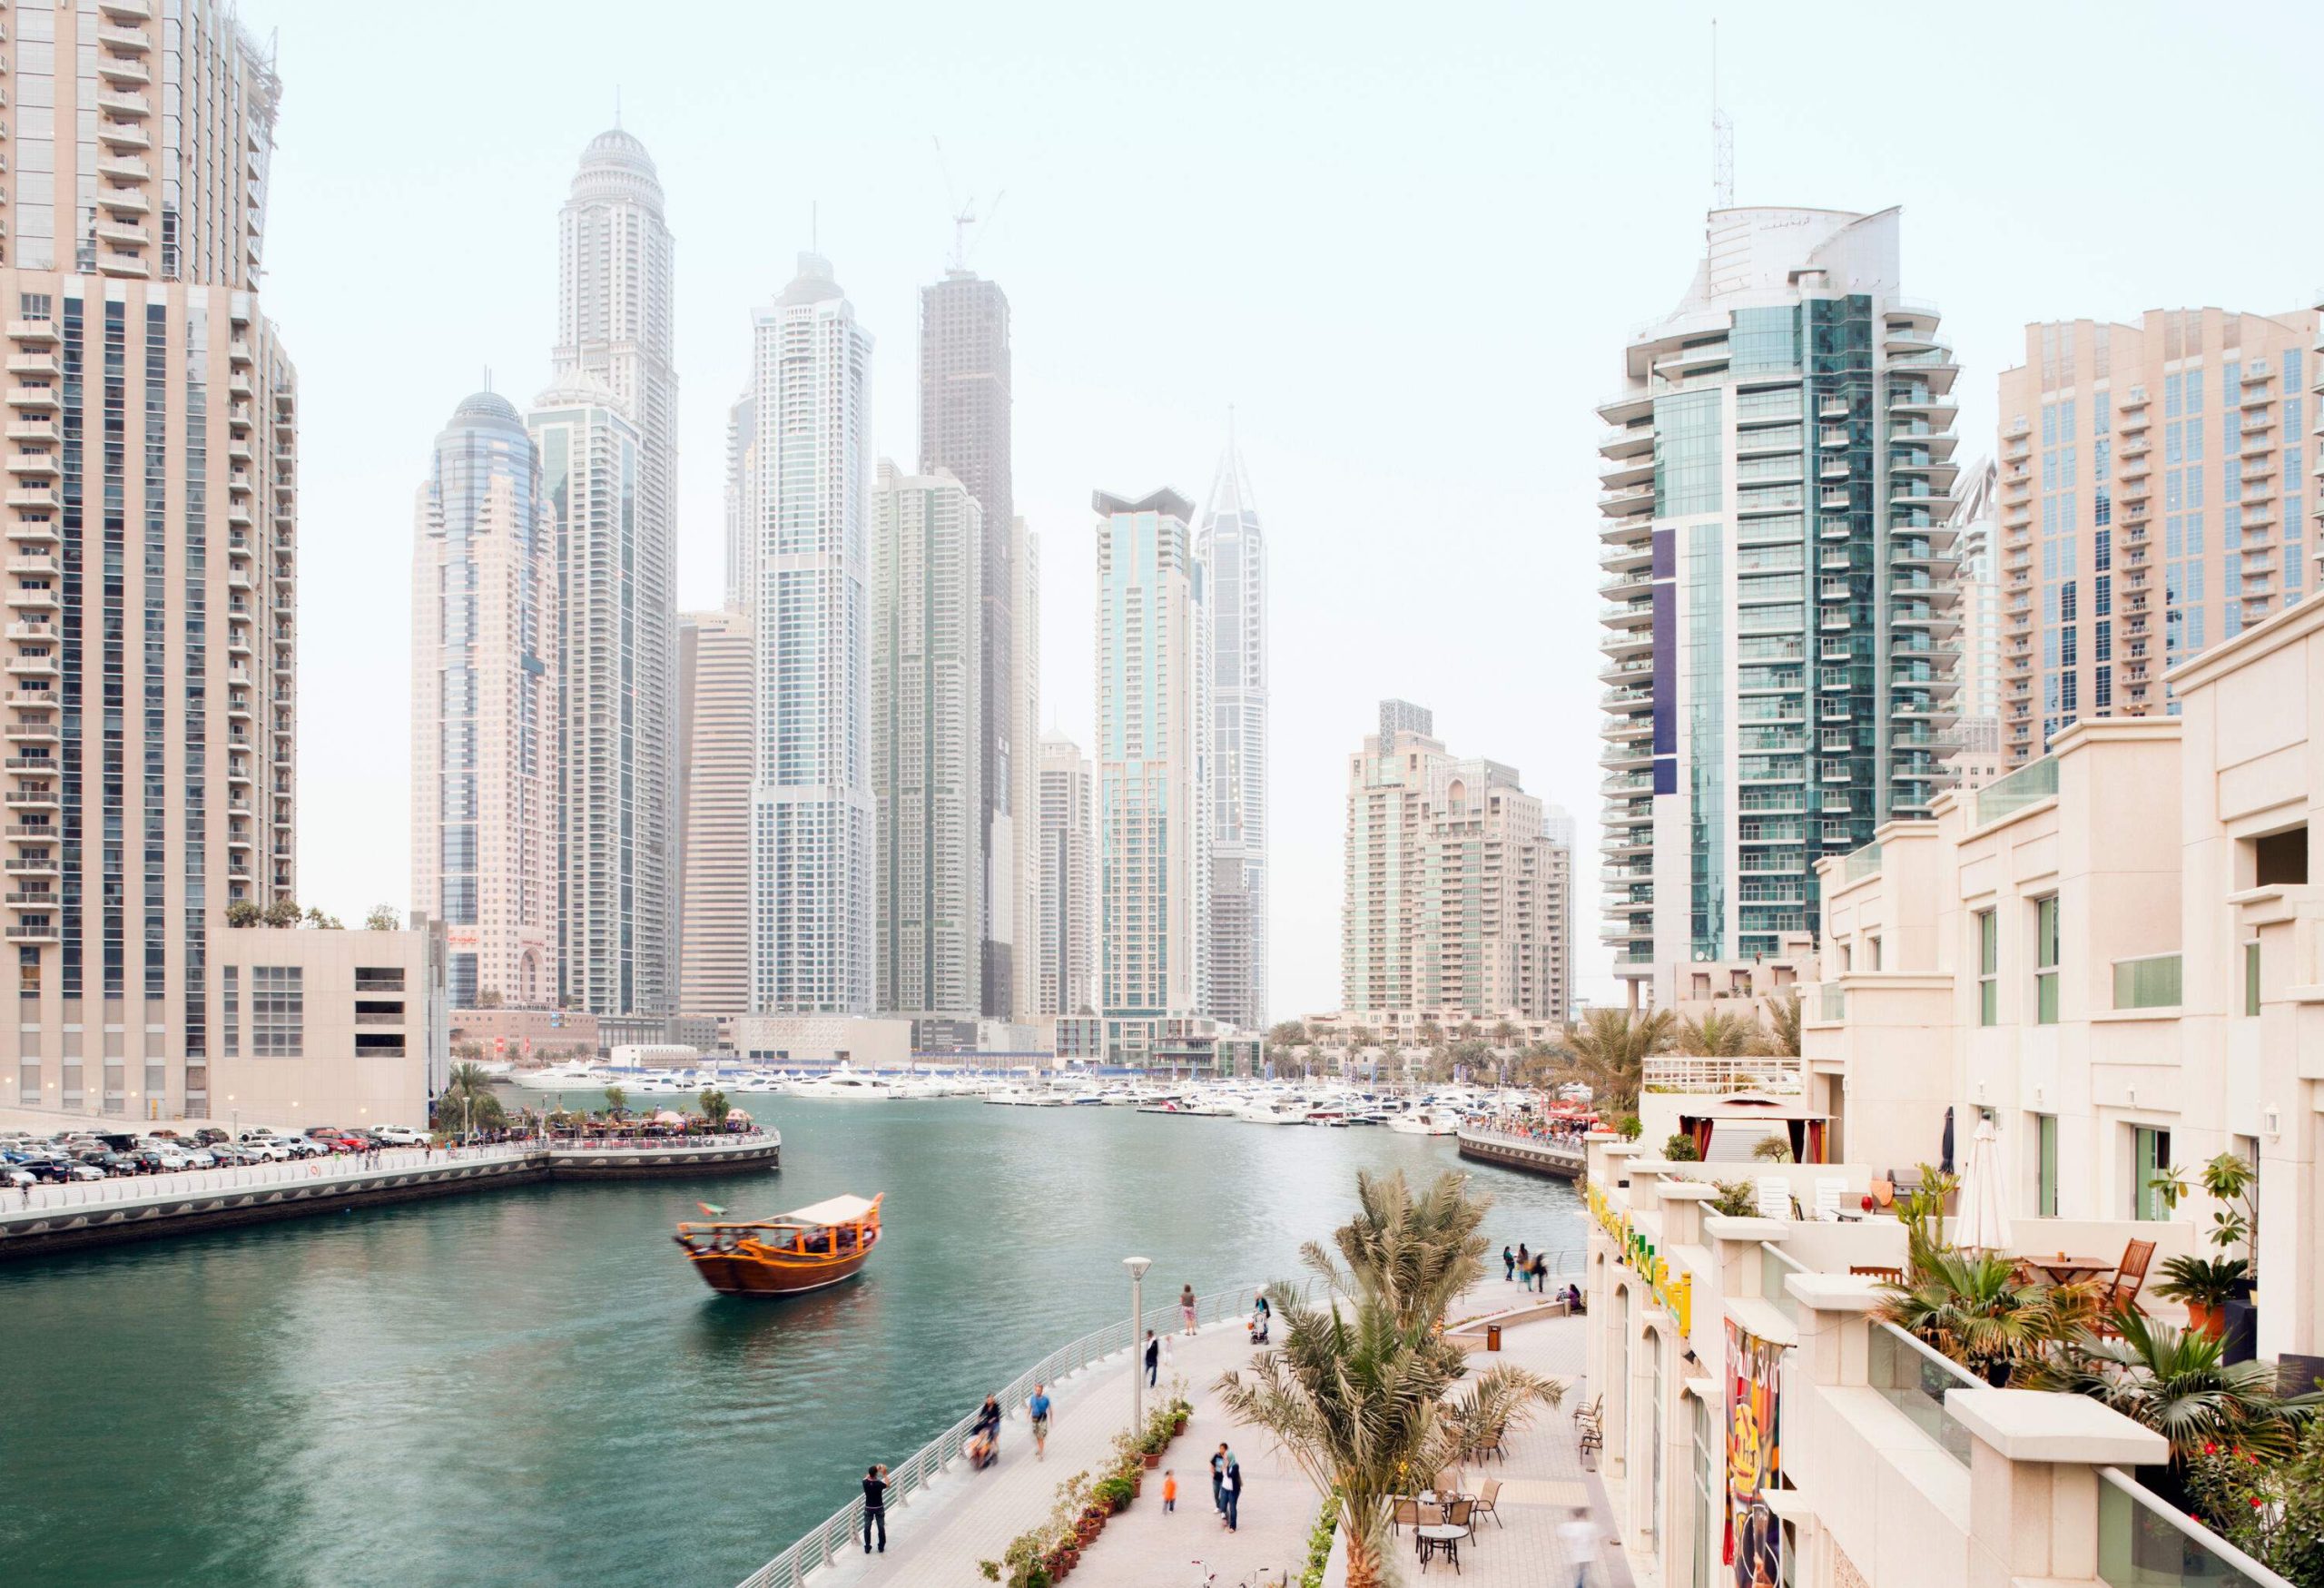 The affluent Dubai Marina skyline with canal-side promenades lined with restaurants and high-rise buildings.